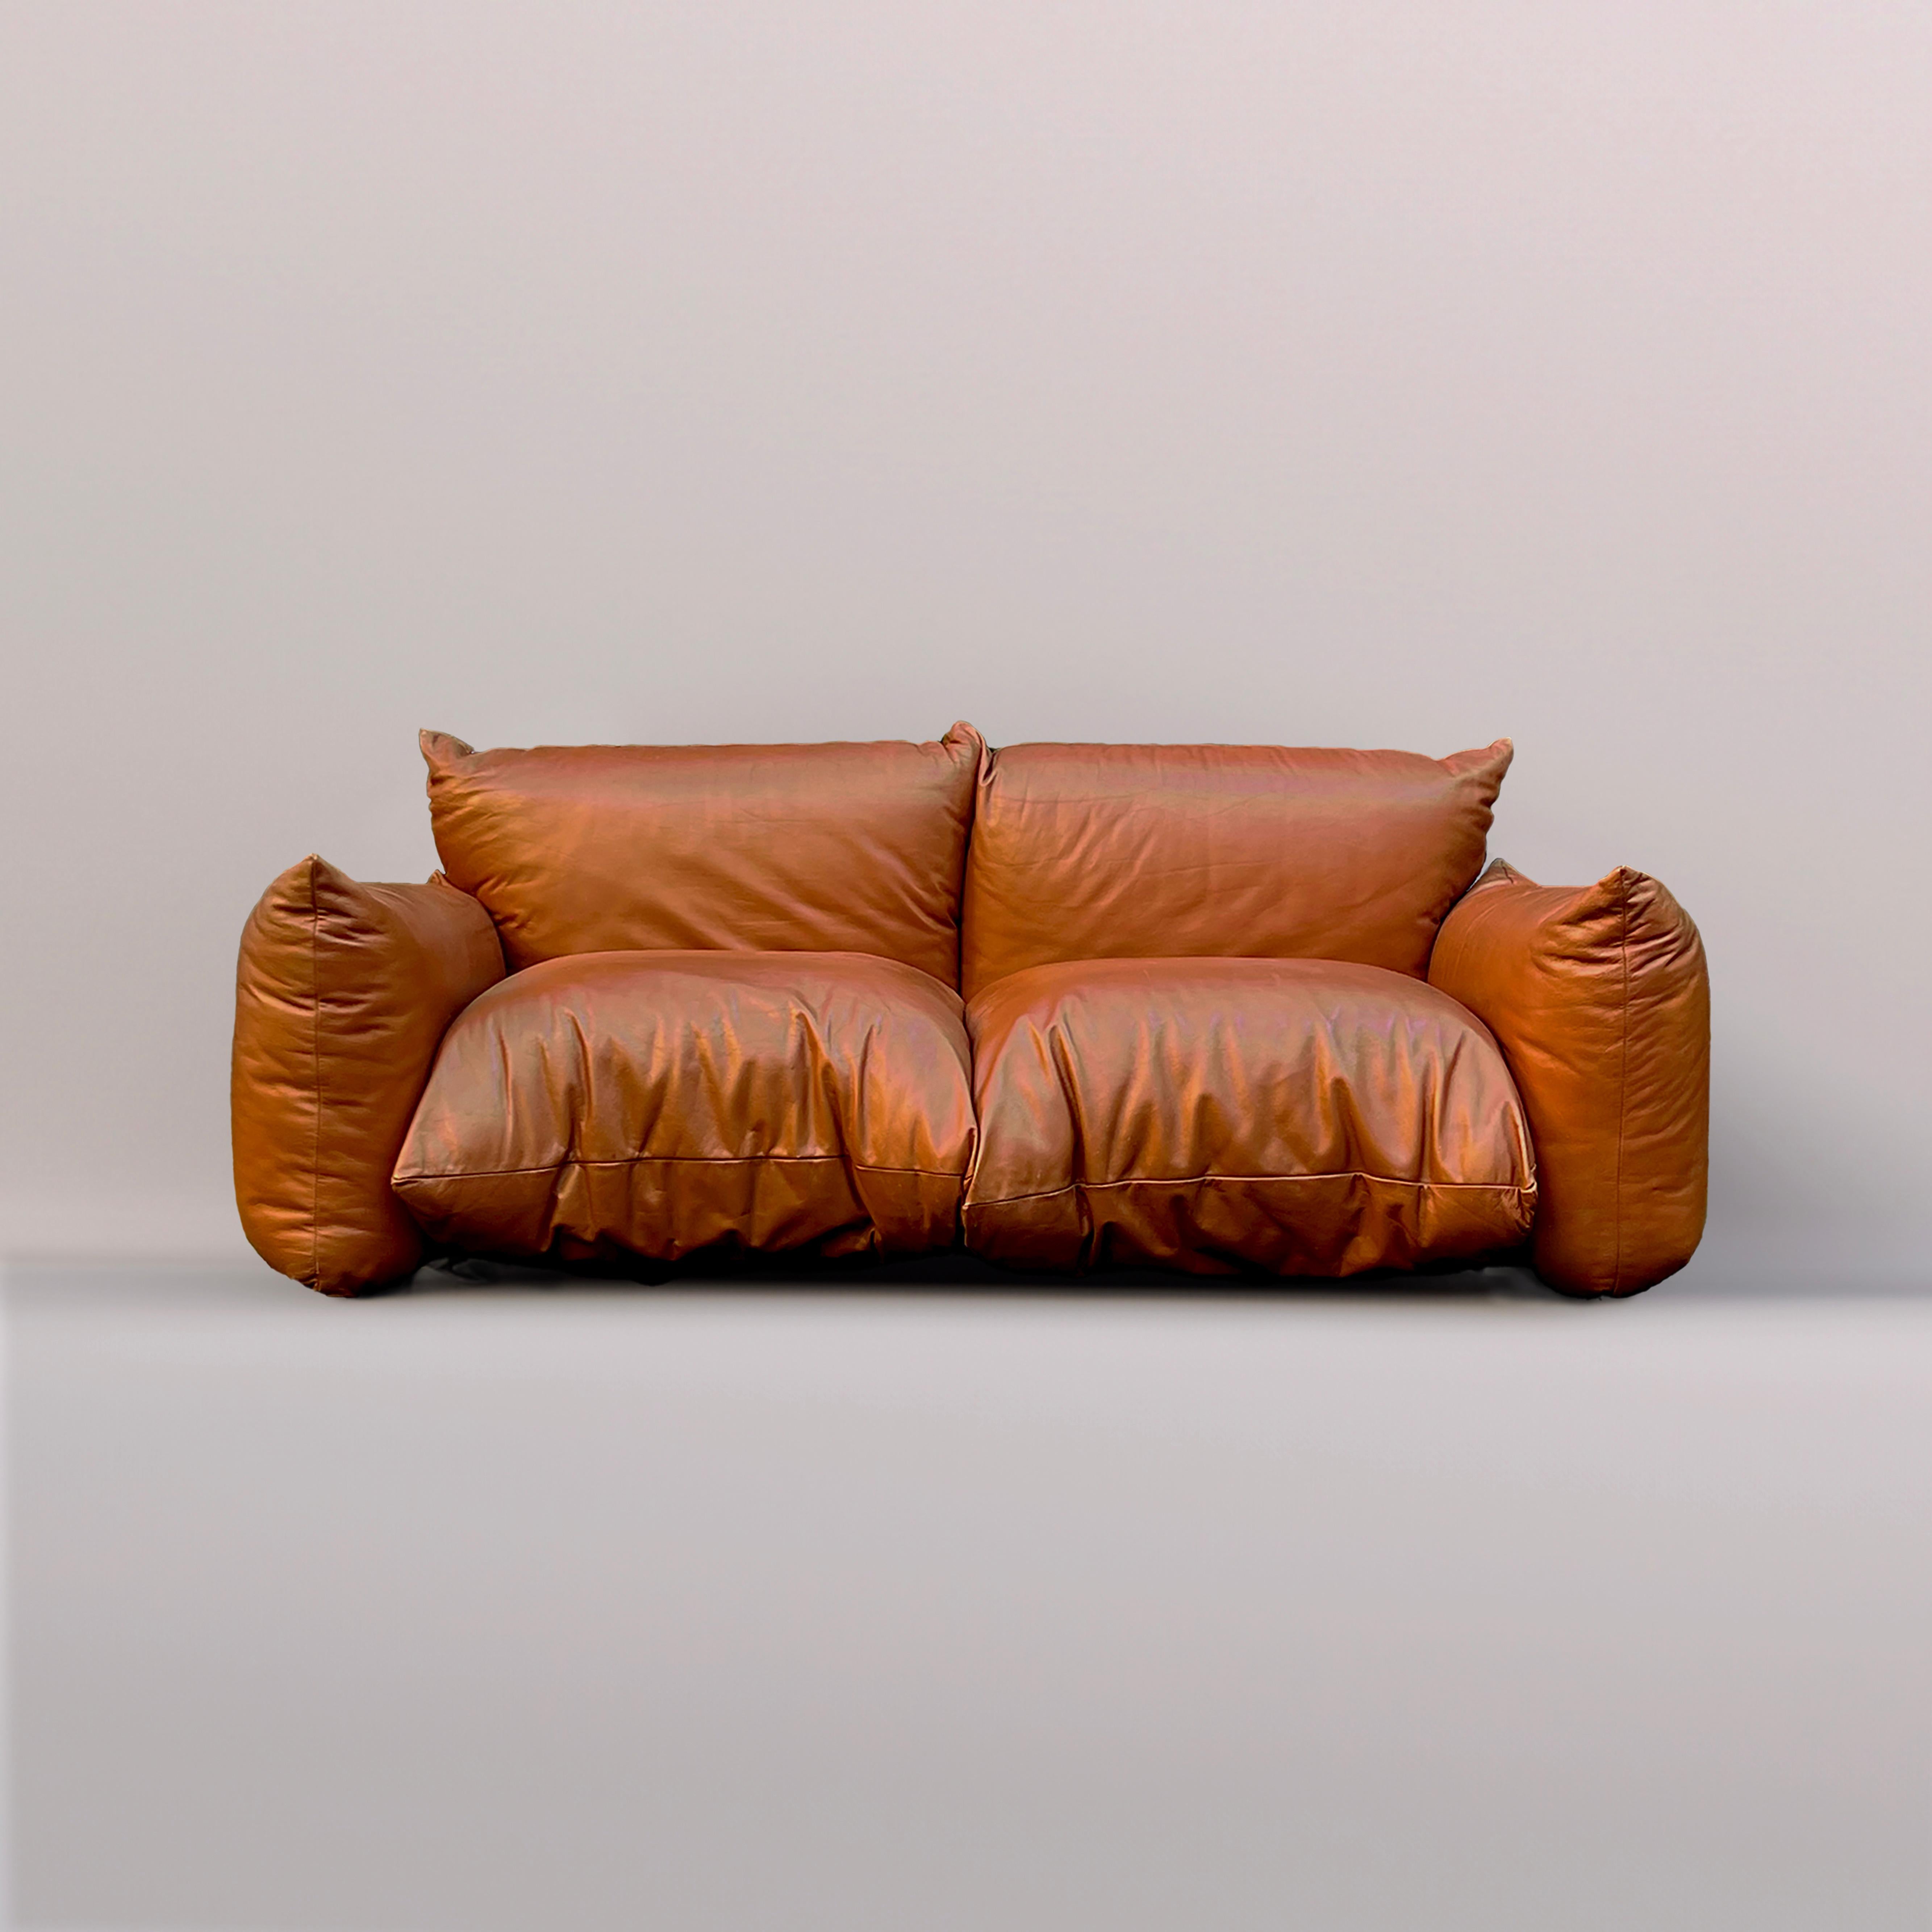 Mario Marenco, in collaboration with the renowned Italian furniture manufacturer Arflex, introduced the iconic 'Marenco' two-seater sofa to the design world in 1970. This opulent and exceptionally comfortable piece of furniture is a testament to